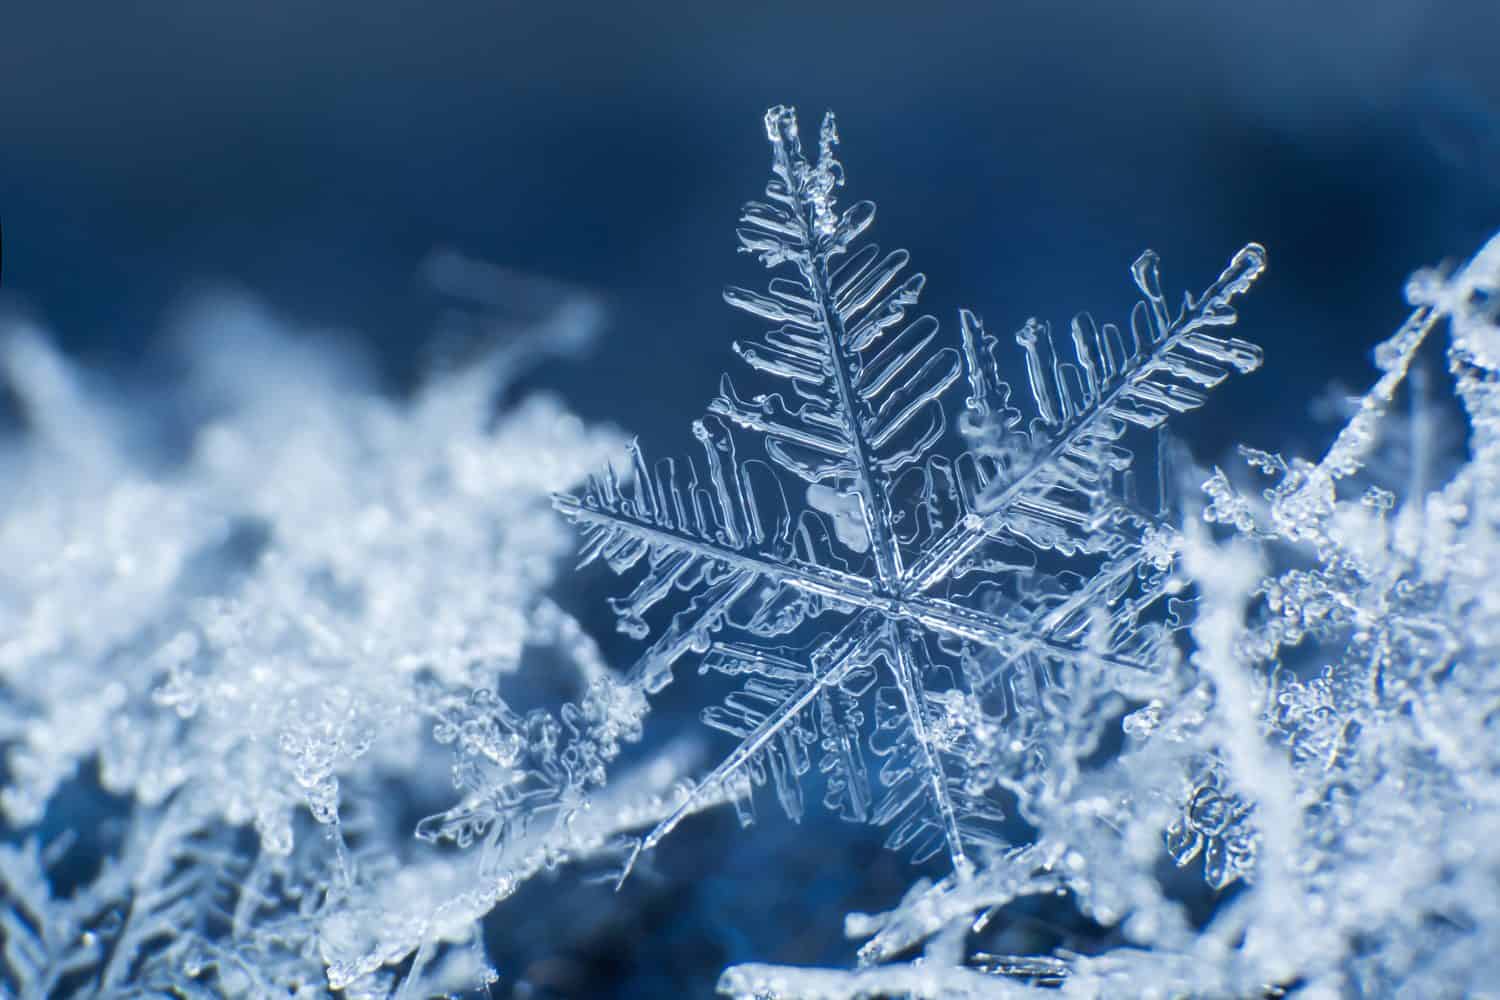 1 of 18 amazing facts about snowflakes: There are 3 basic ingredients: ice crystals, water vapor, and dust